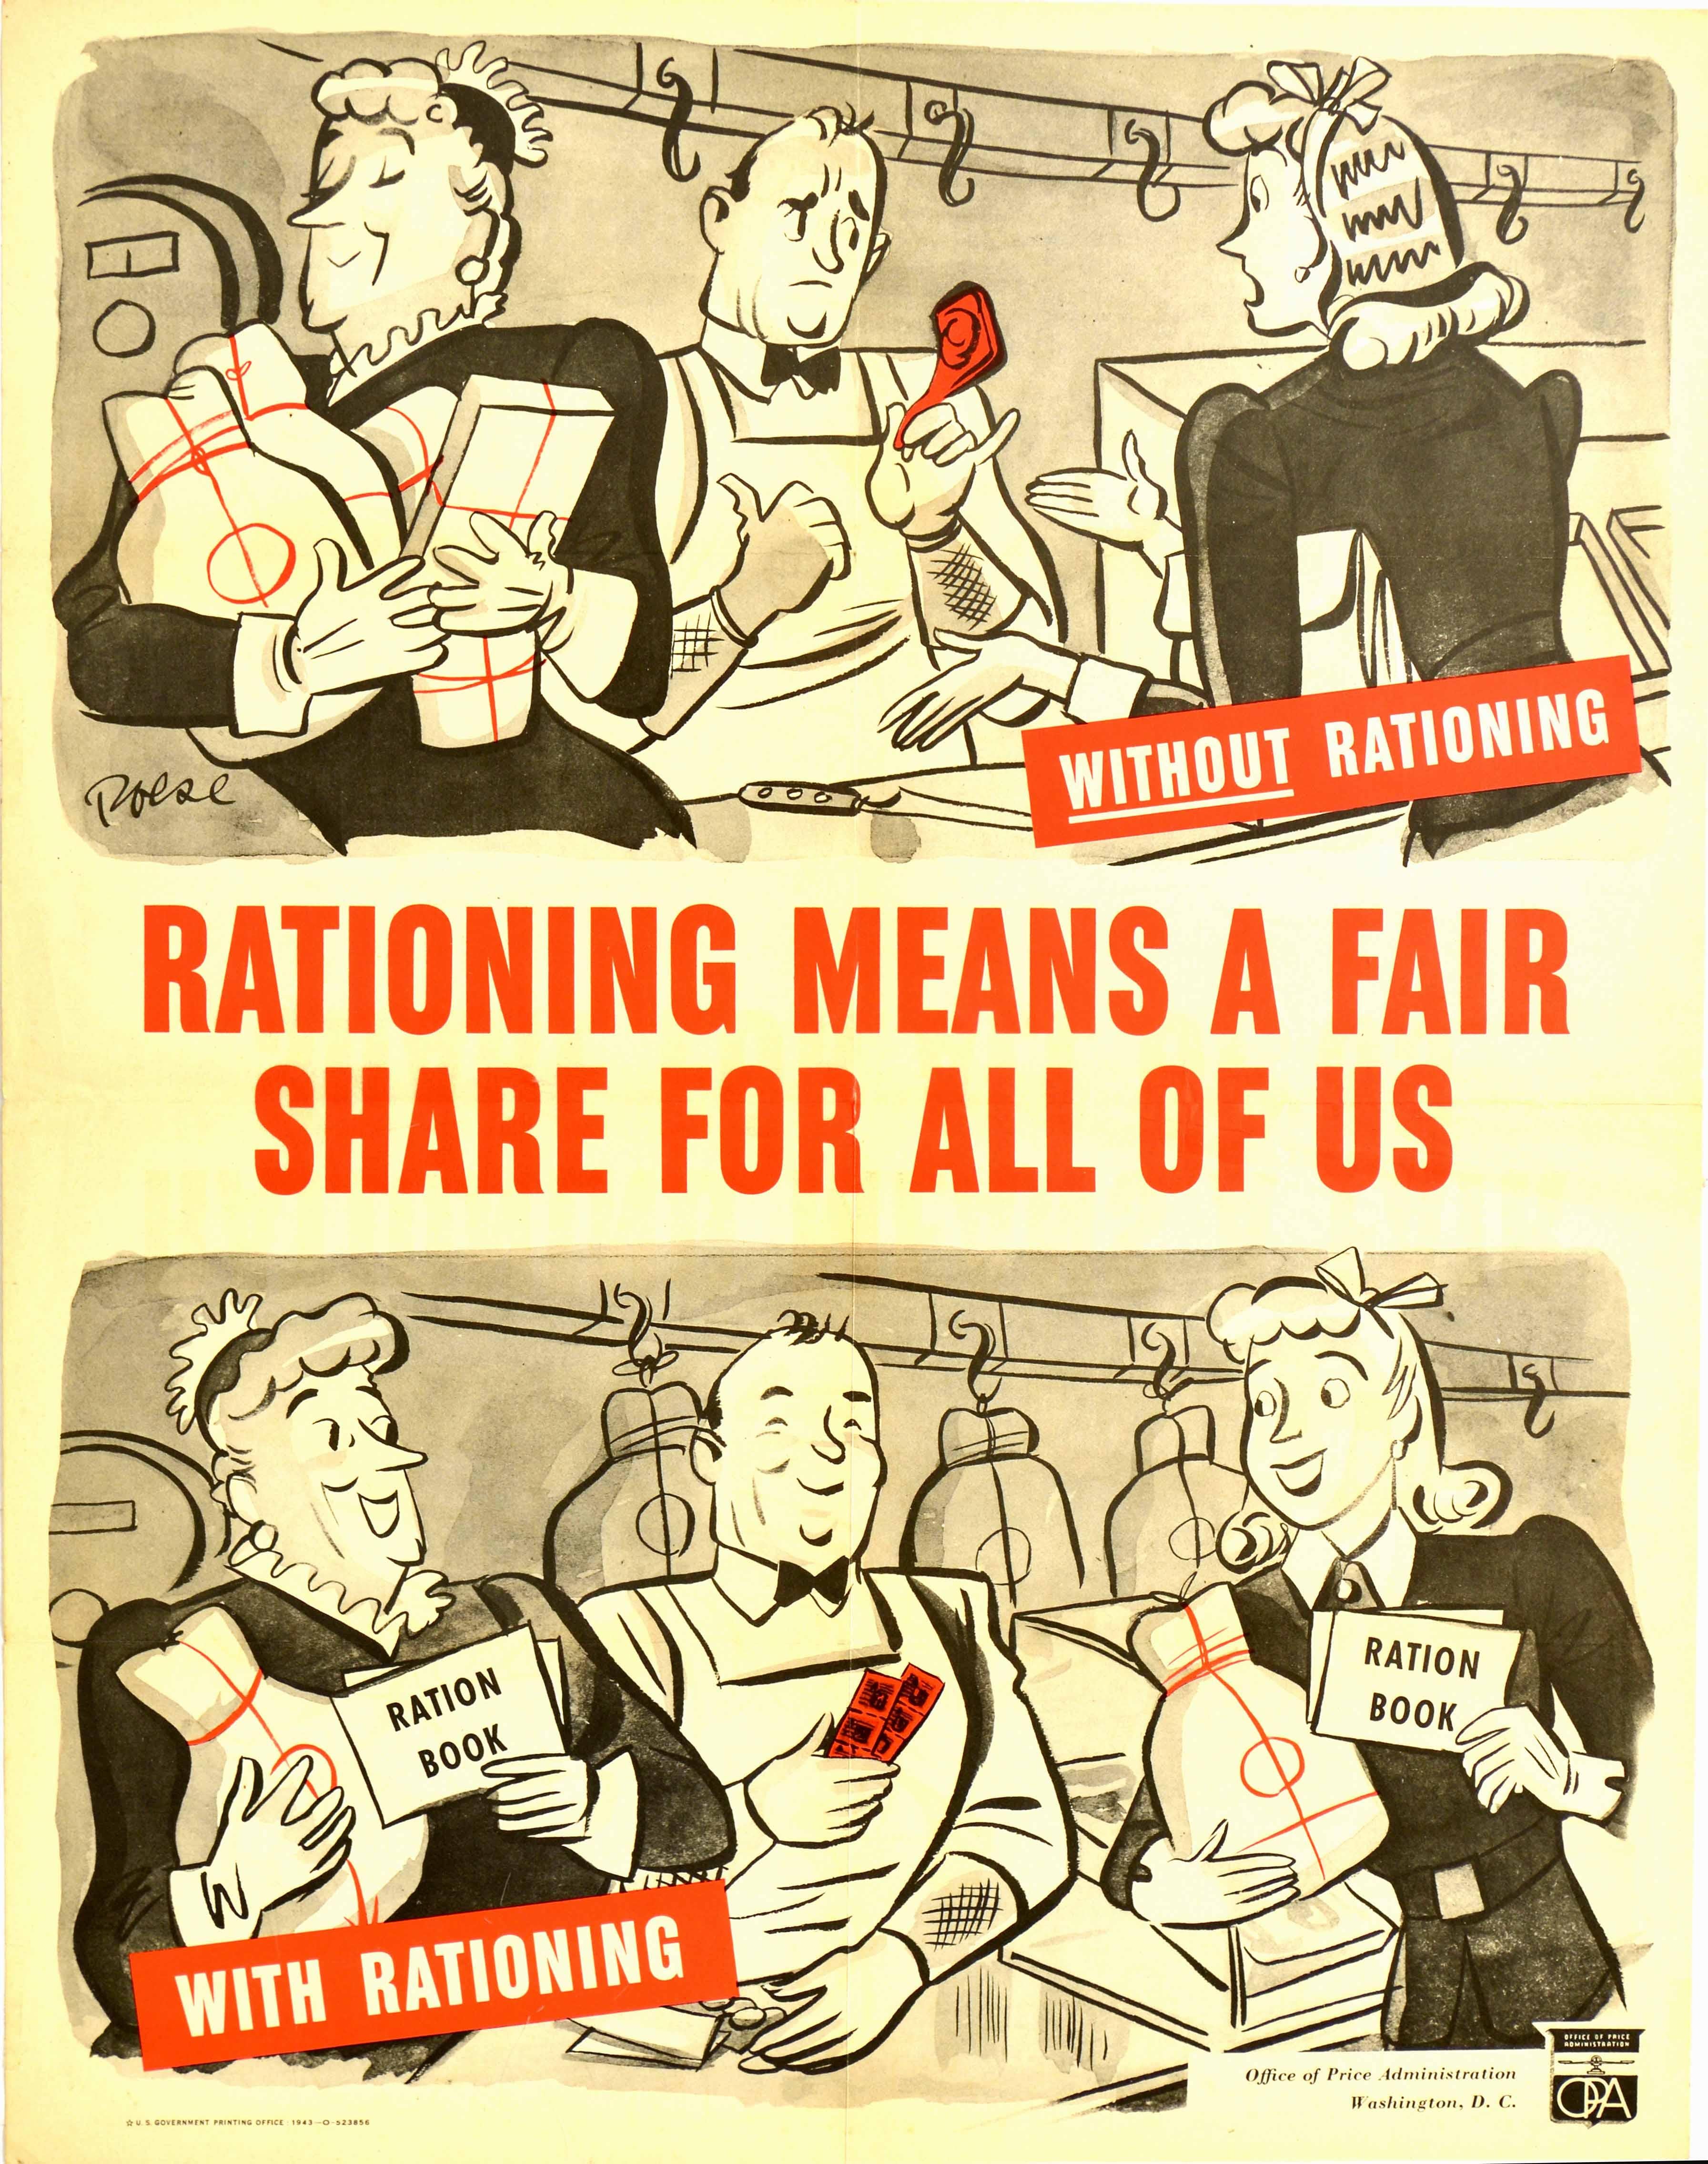 Herbert Roese Print - Original Vintage Poster WWII Rationing Means A Fair Share Food War Ration Book